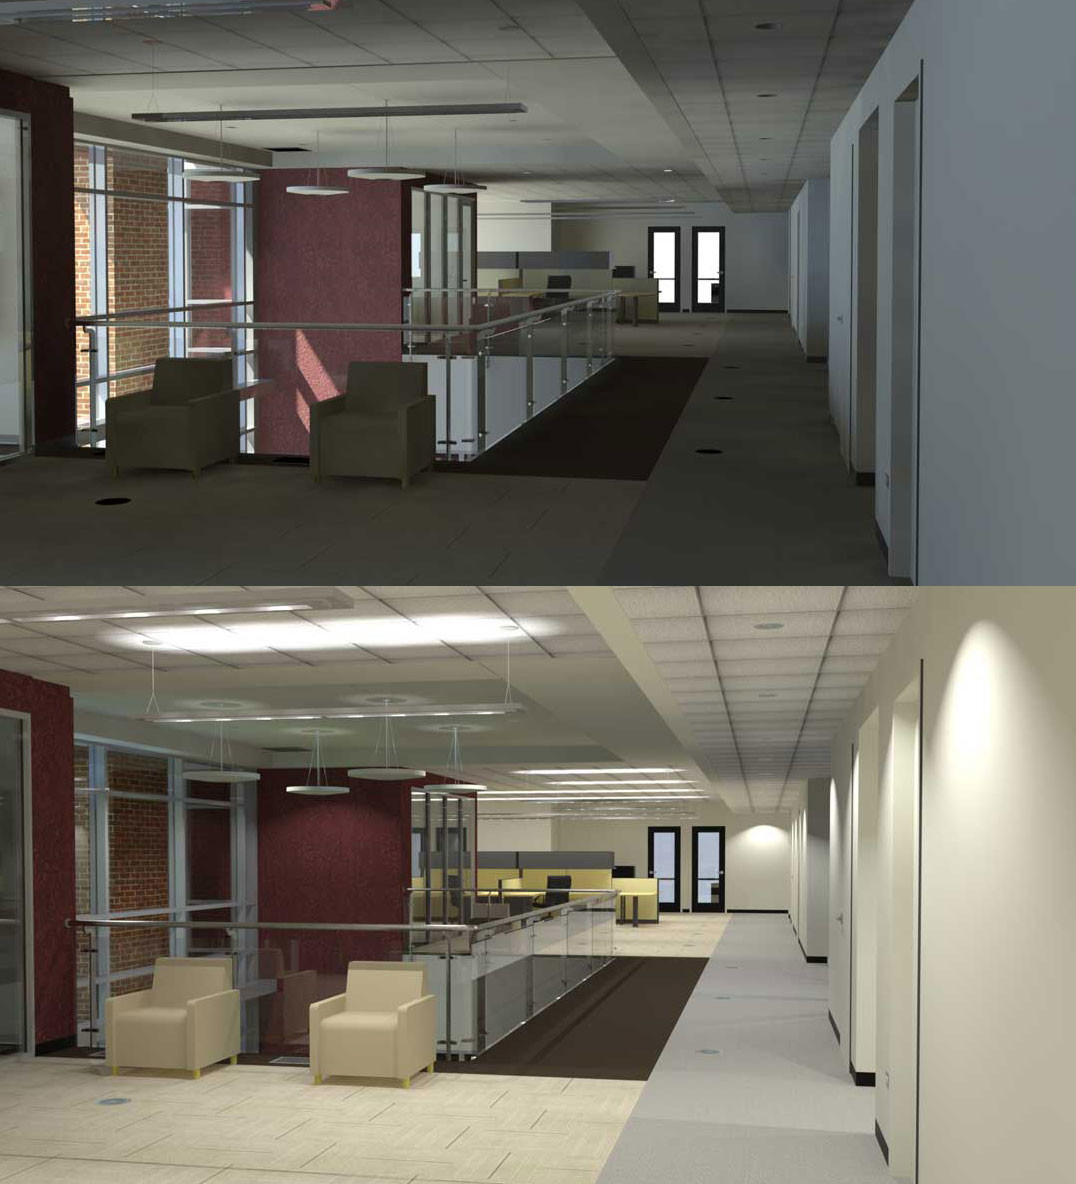 After the SketchUp model was completed, I did render tests in different day/night conditions using Thea Render.